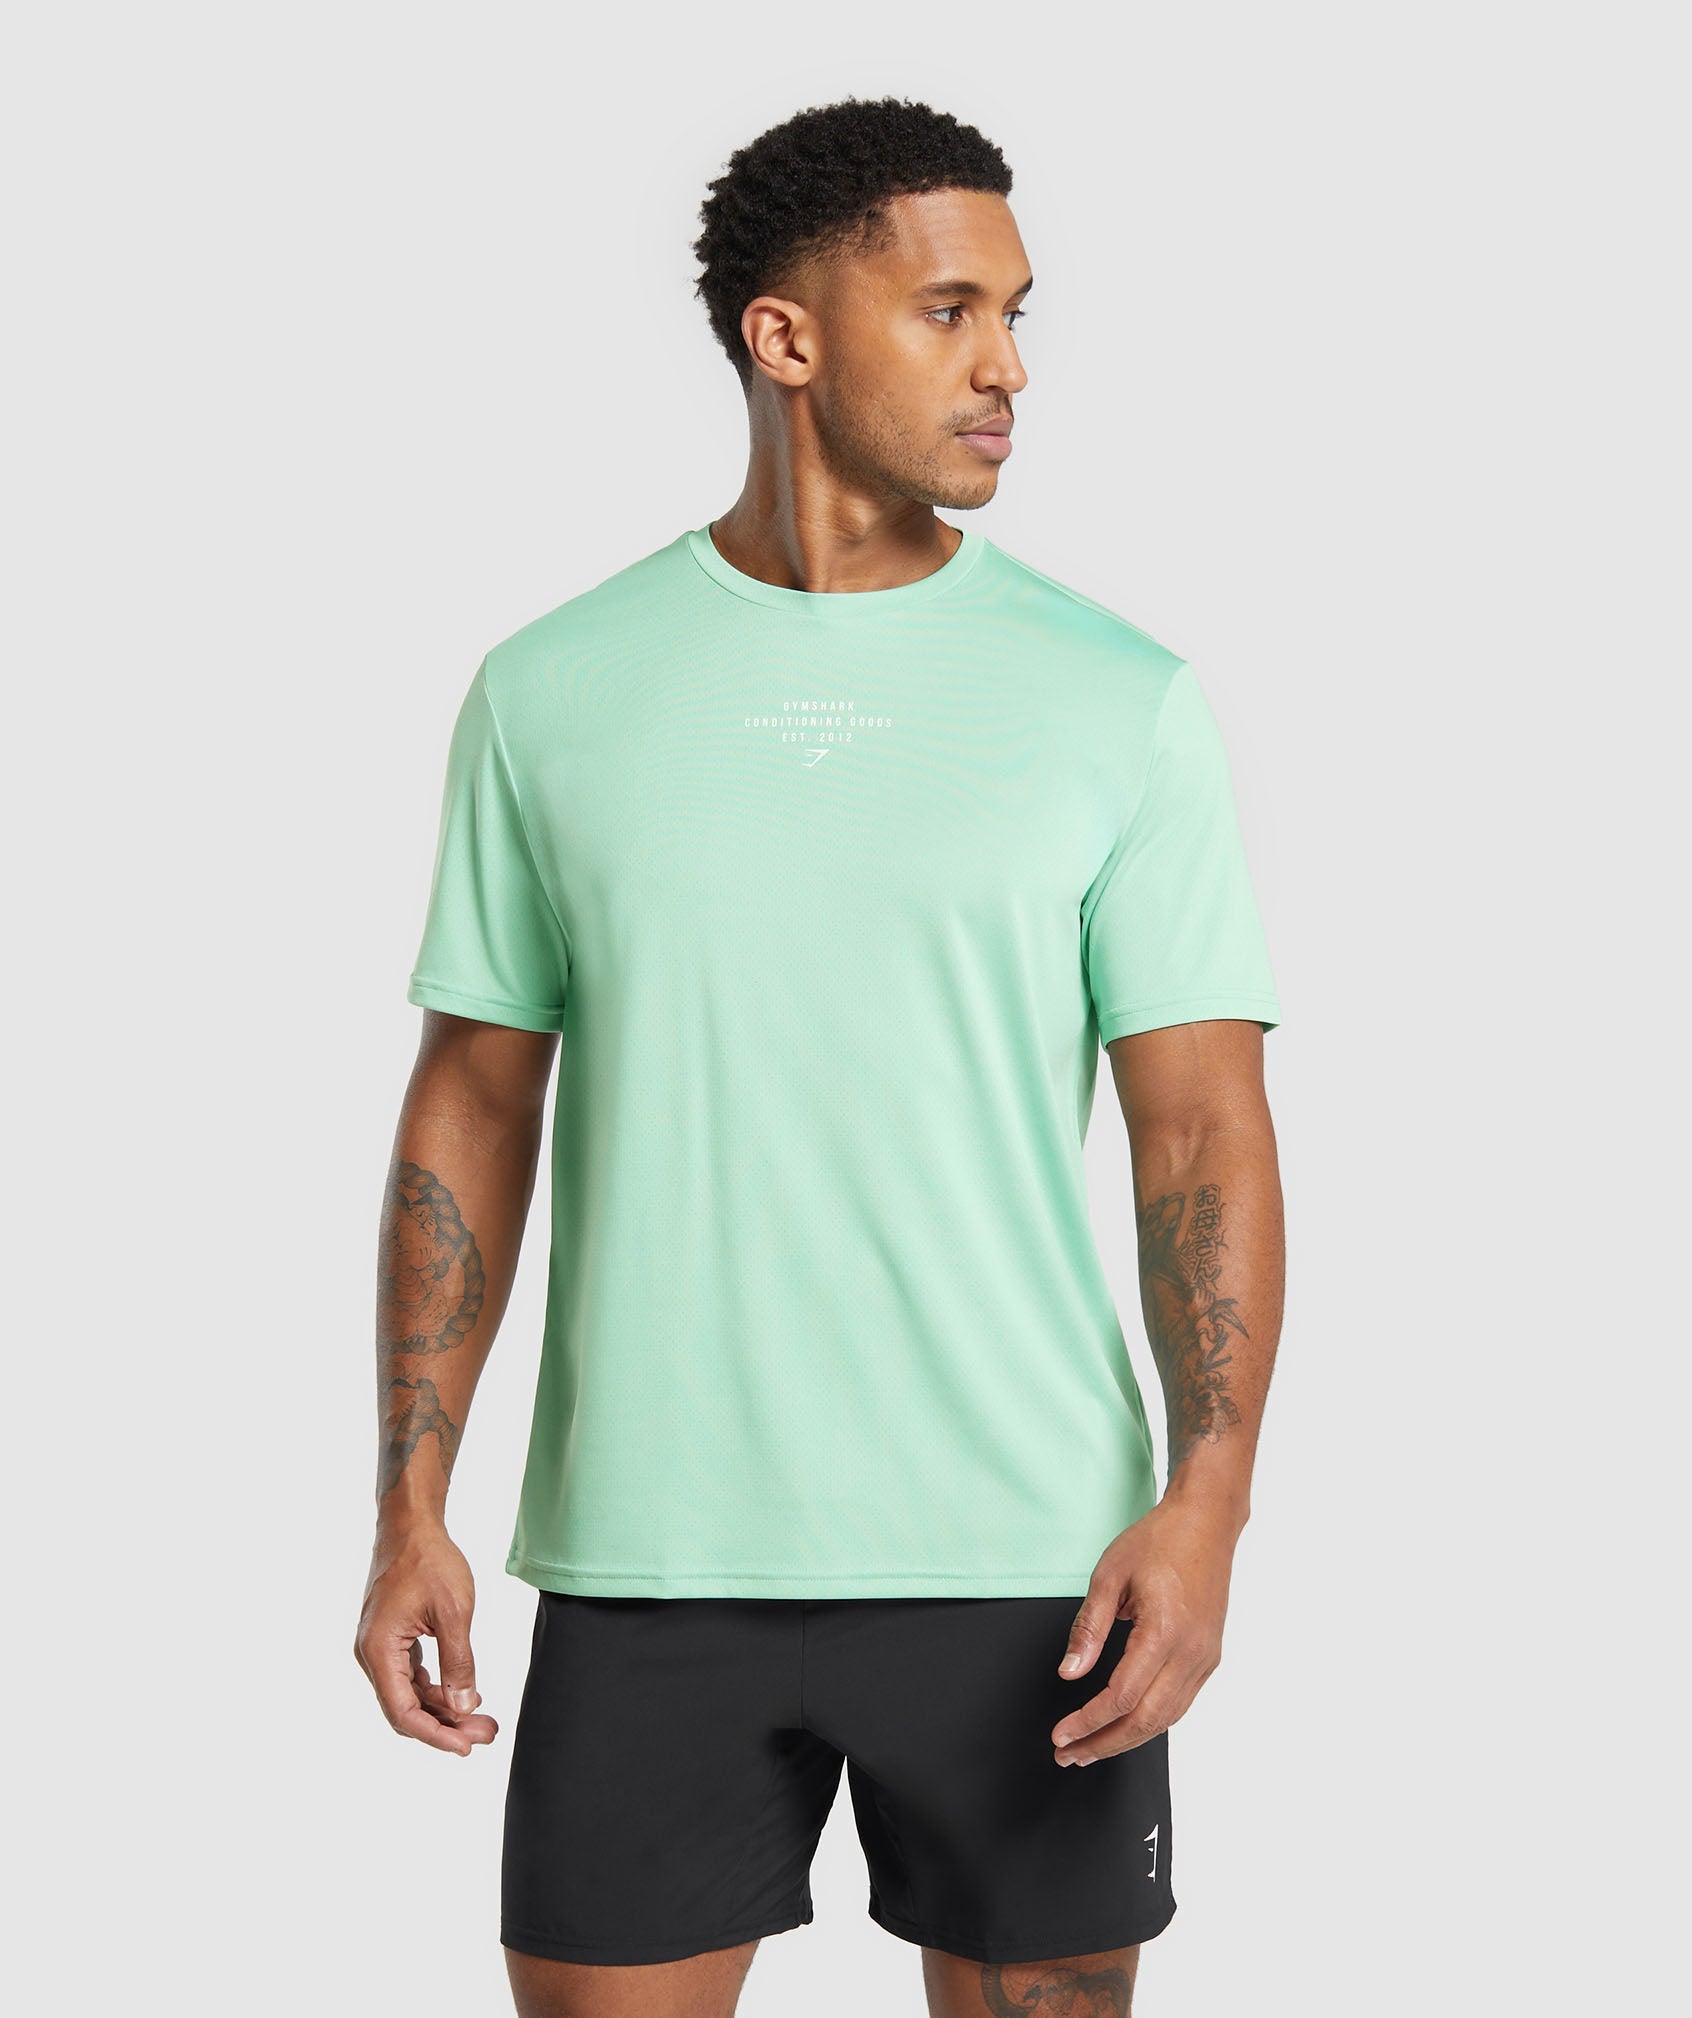 Conditioning Goods T-Shirt in Lido Green - view 1